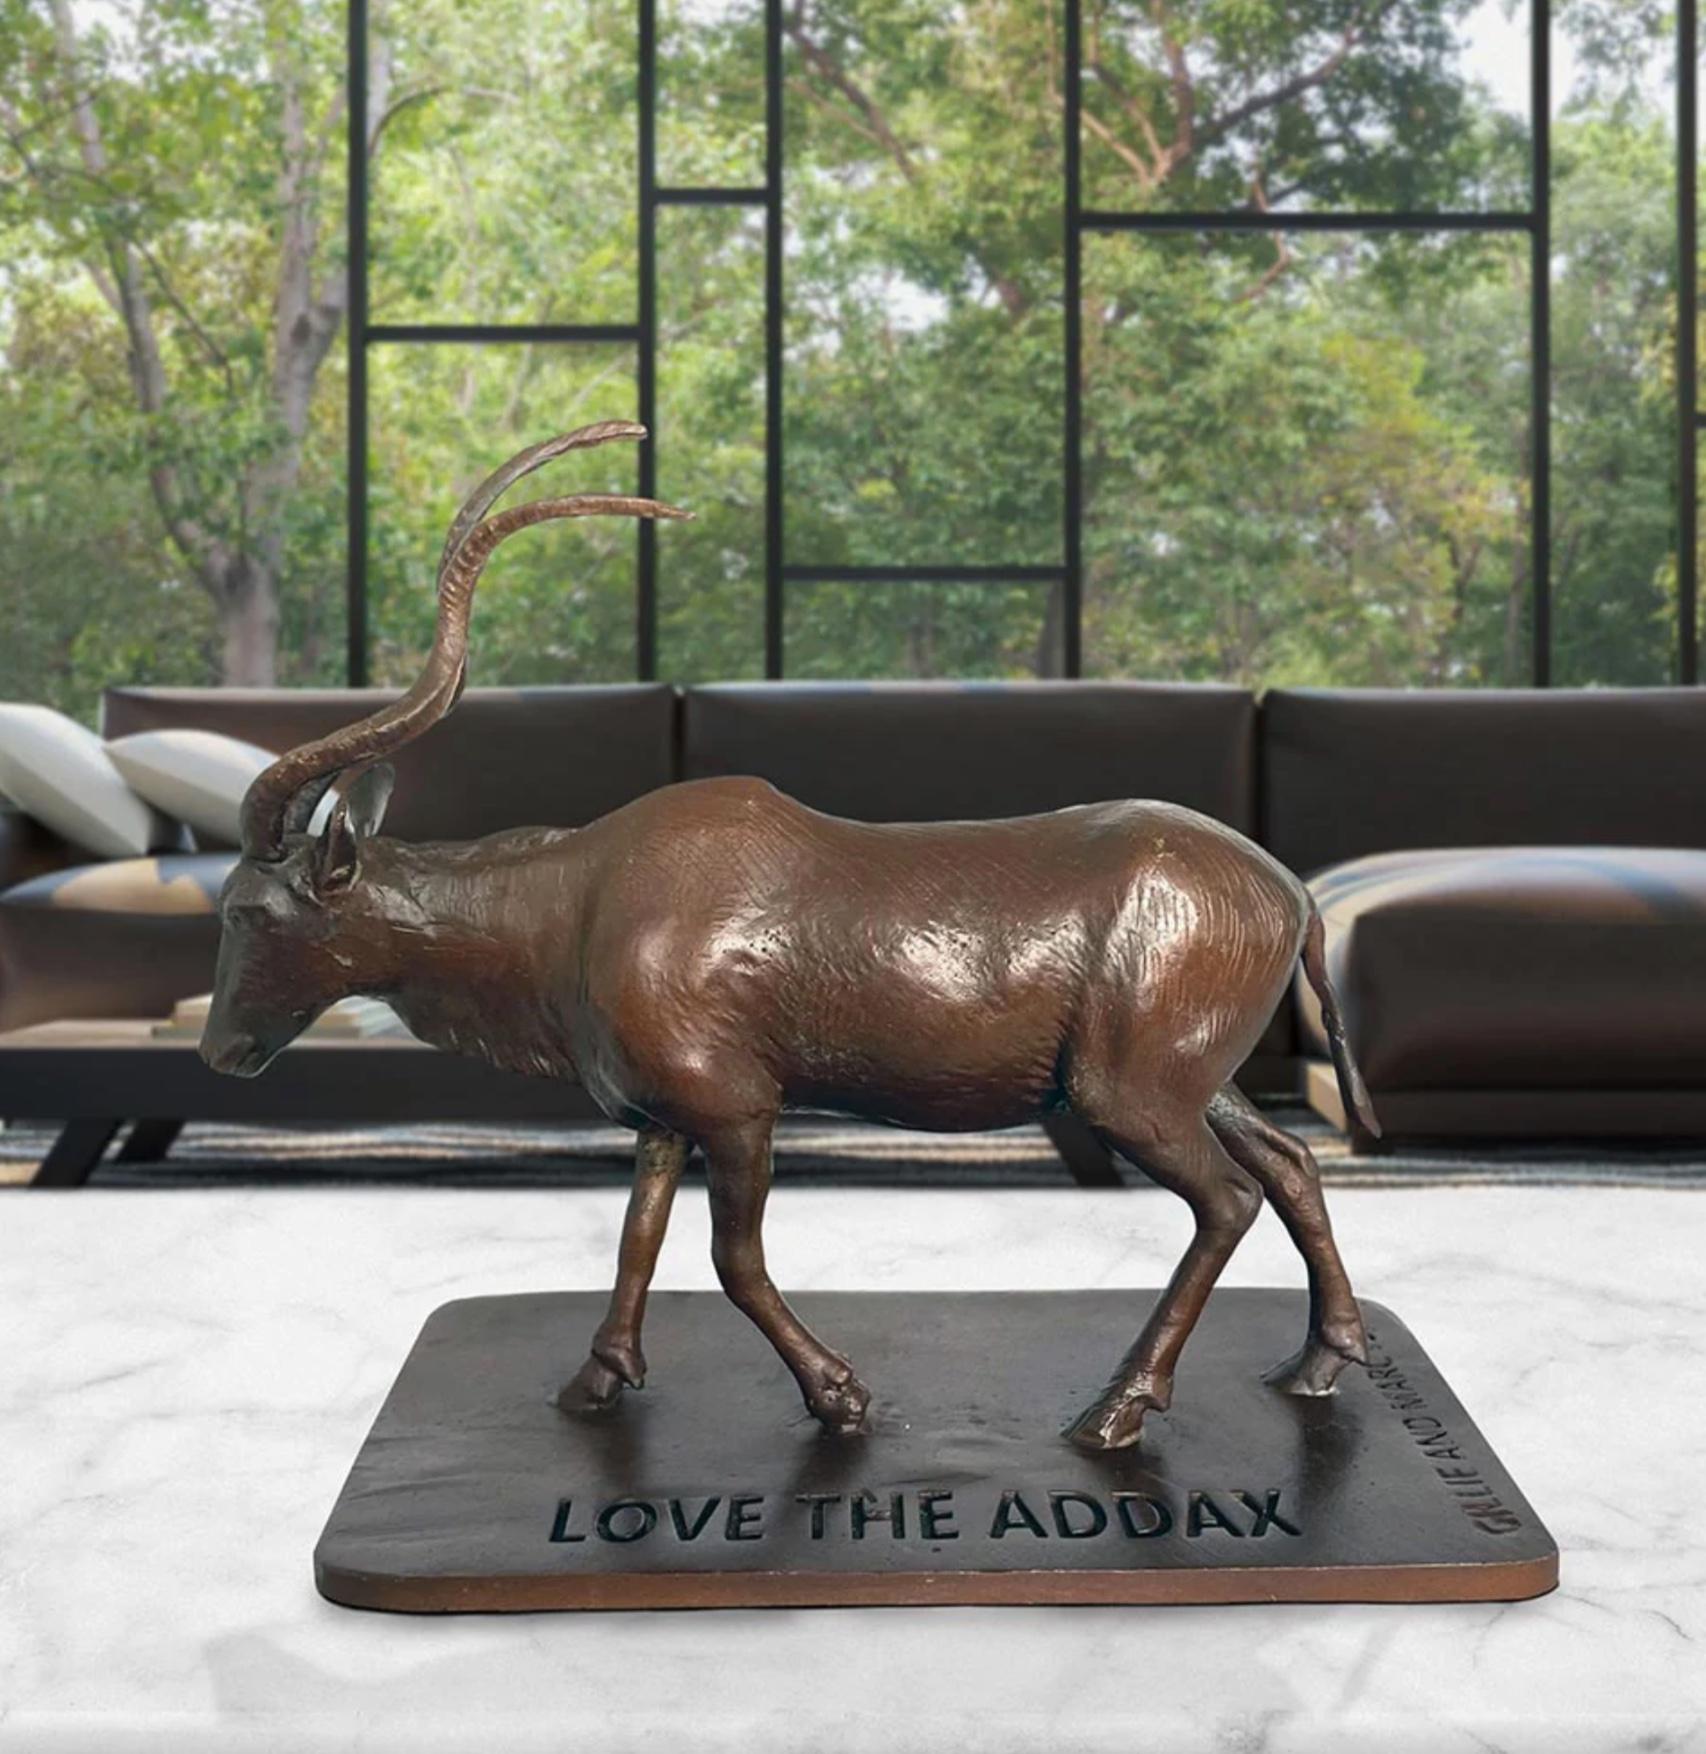 Title: Love the Eastern Lowland Gorilla
Authentic Bronze Sculpture

Description:
This authentic bronze sculpture titled 'Love the Addax' by artists Gillie and Marc has been meticulously crafted in bronze. It features an Addax marching and comes in a